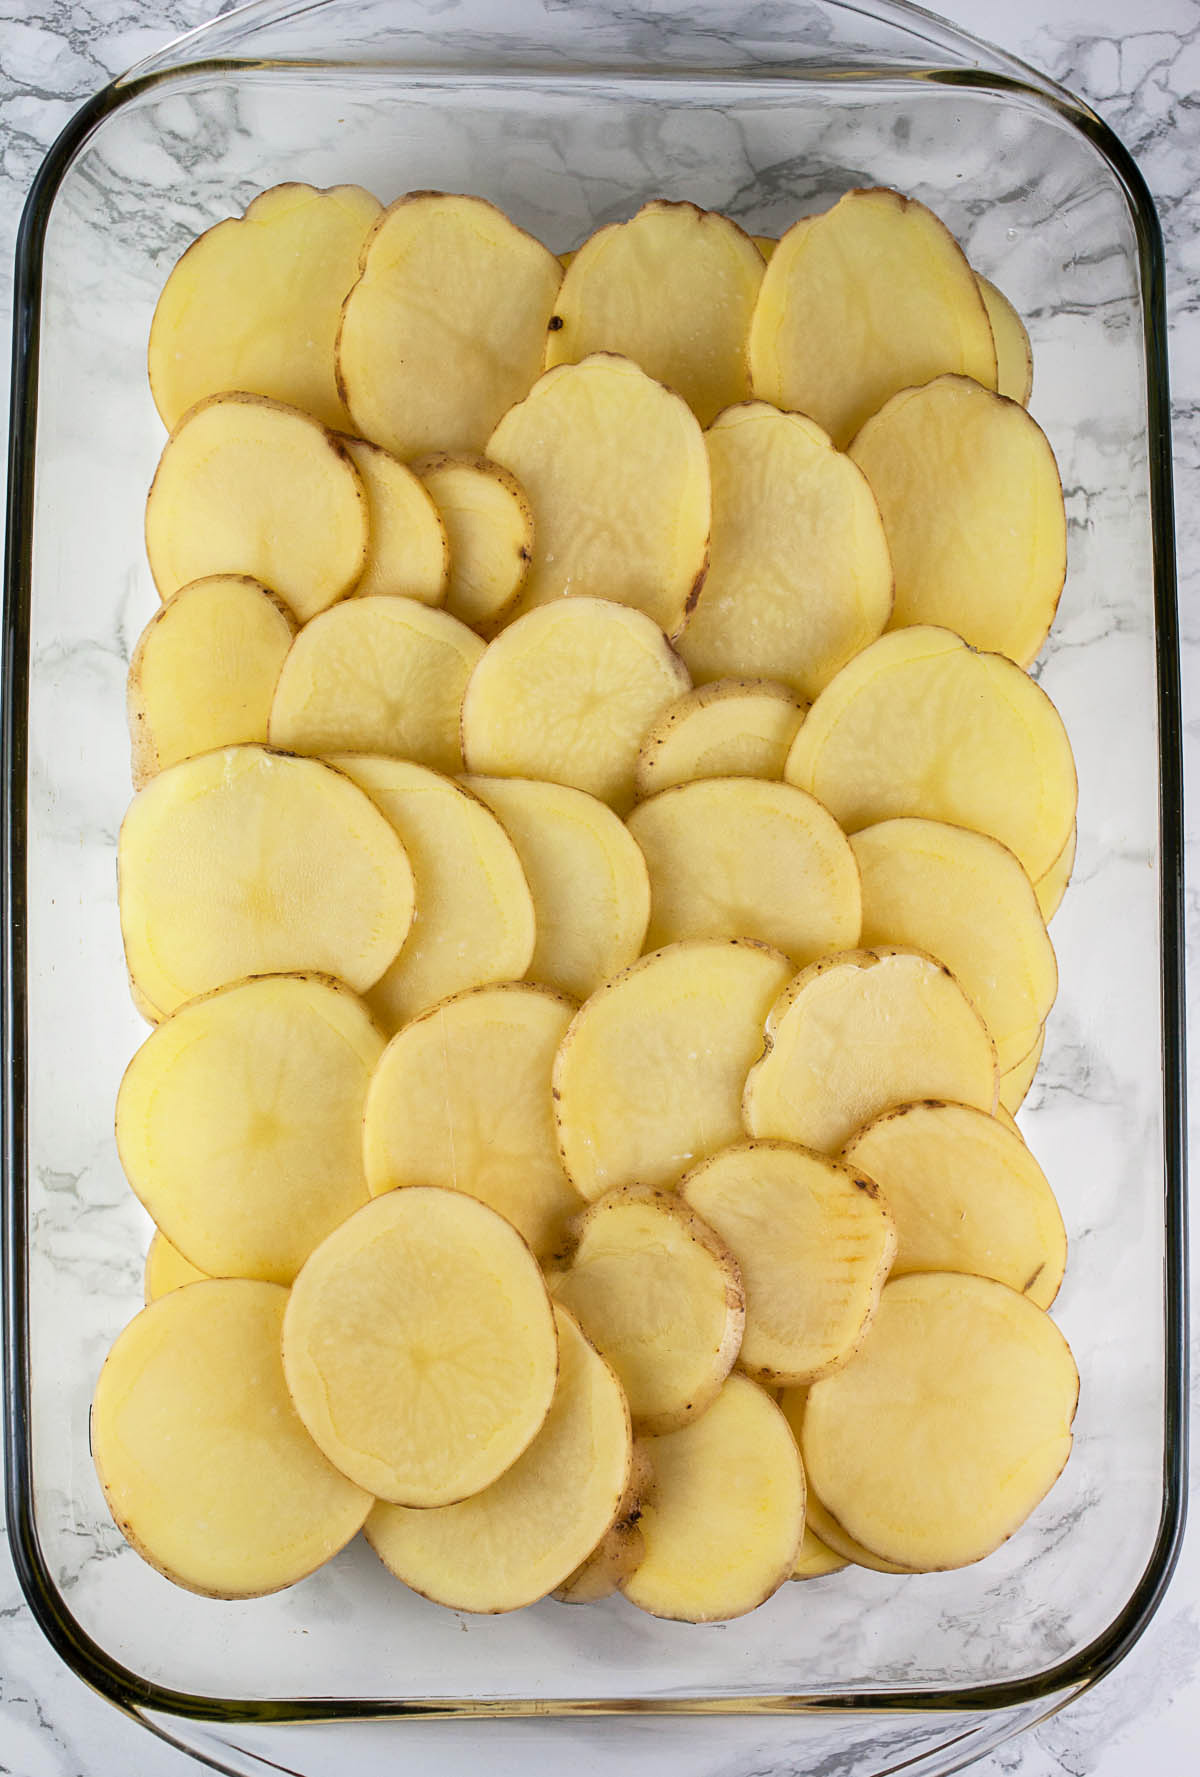 Thinly sliced yellow potatoes in glass cake pan.